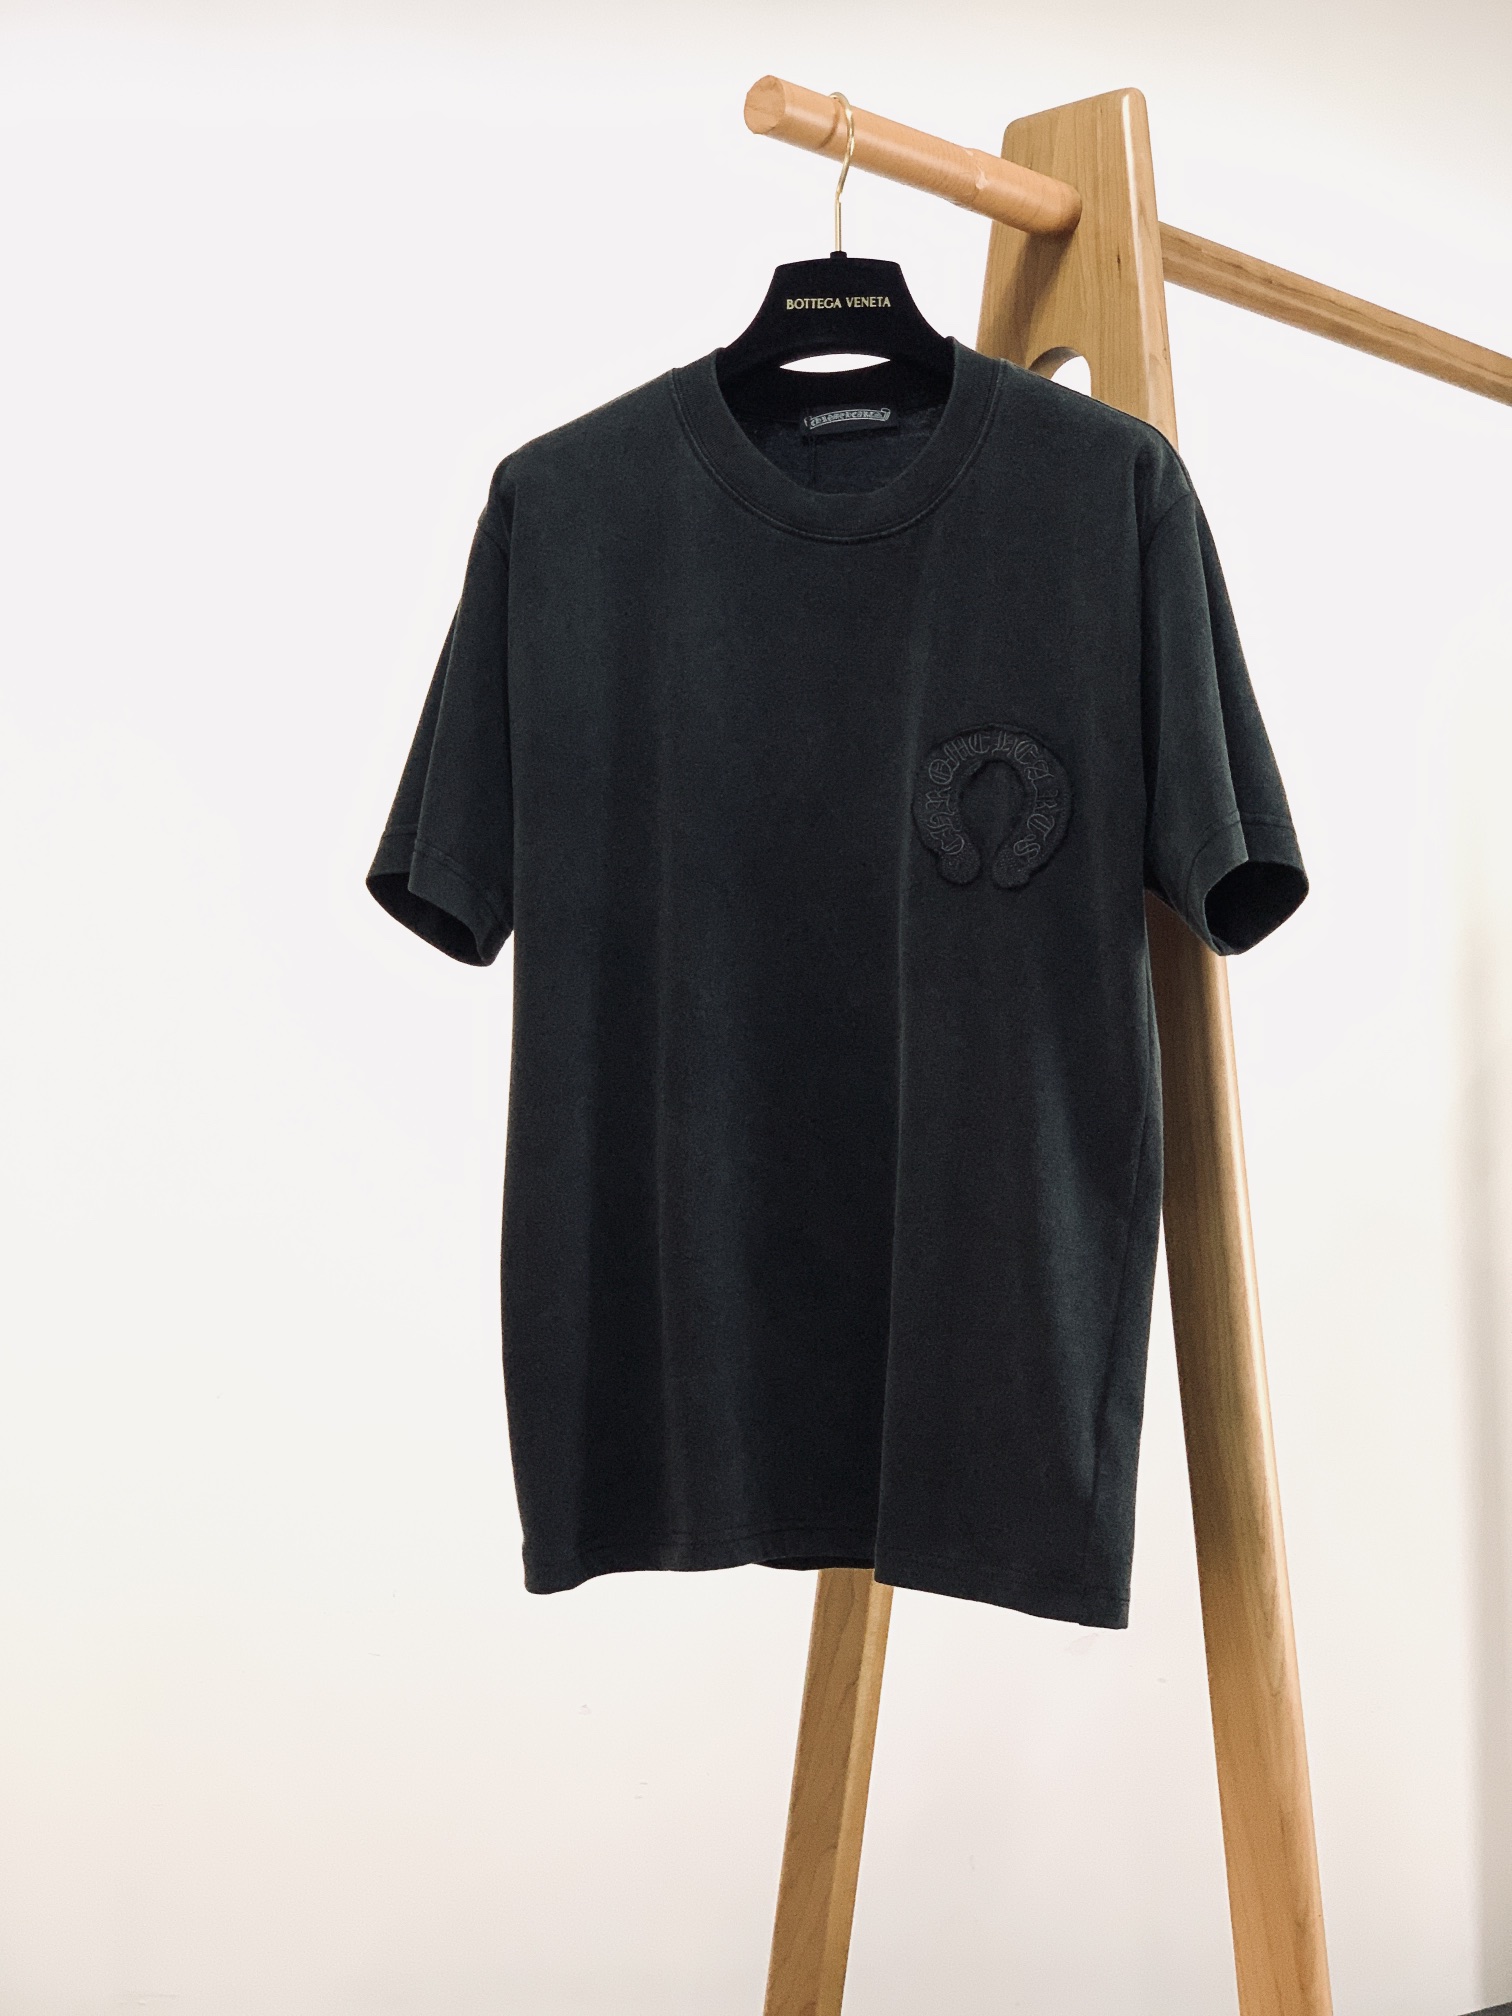 How to Buy Replcia
 Chrome Hearts Good
 Clothing T-Shirt Unisex Cotton Spring/Summer Collection Fashion